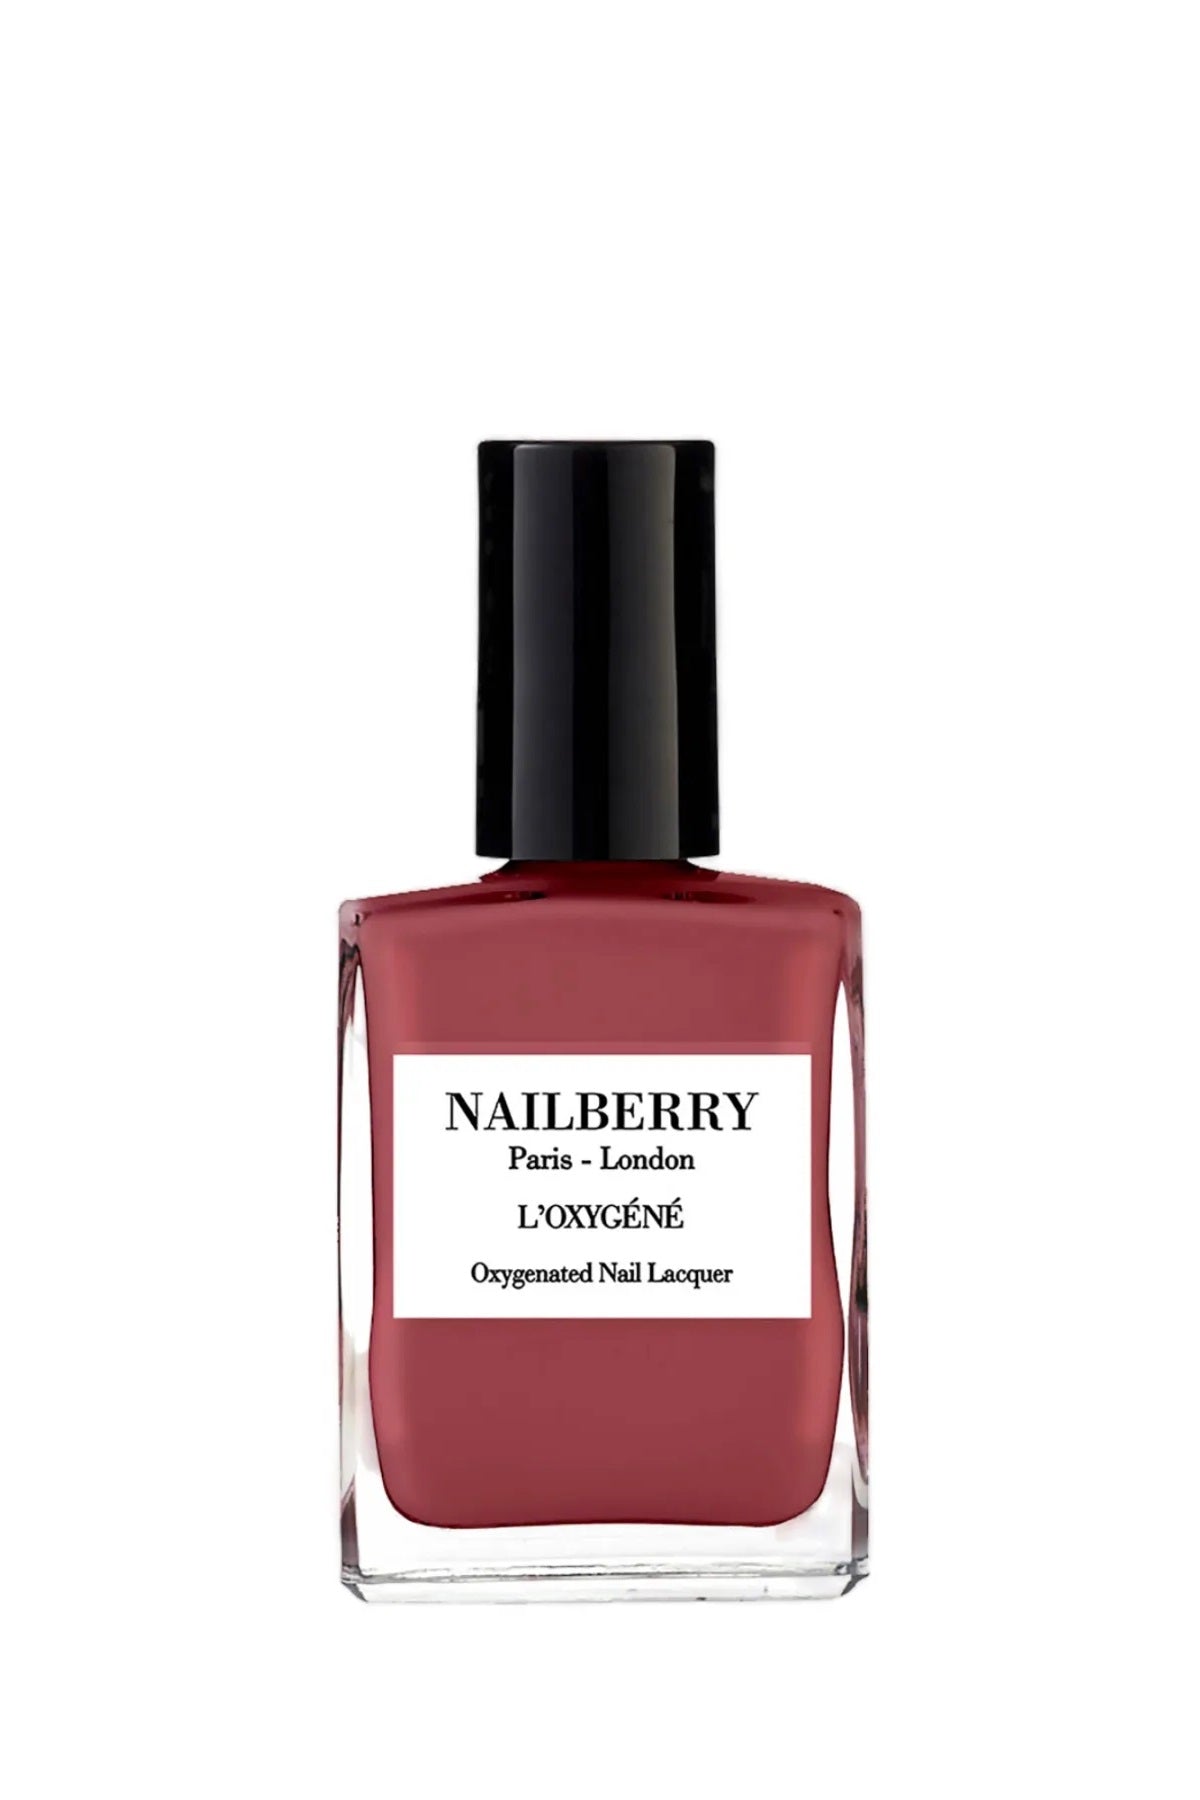 NAILBERRY Cashmere